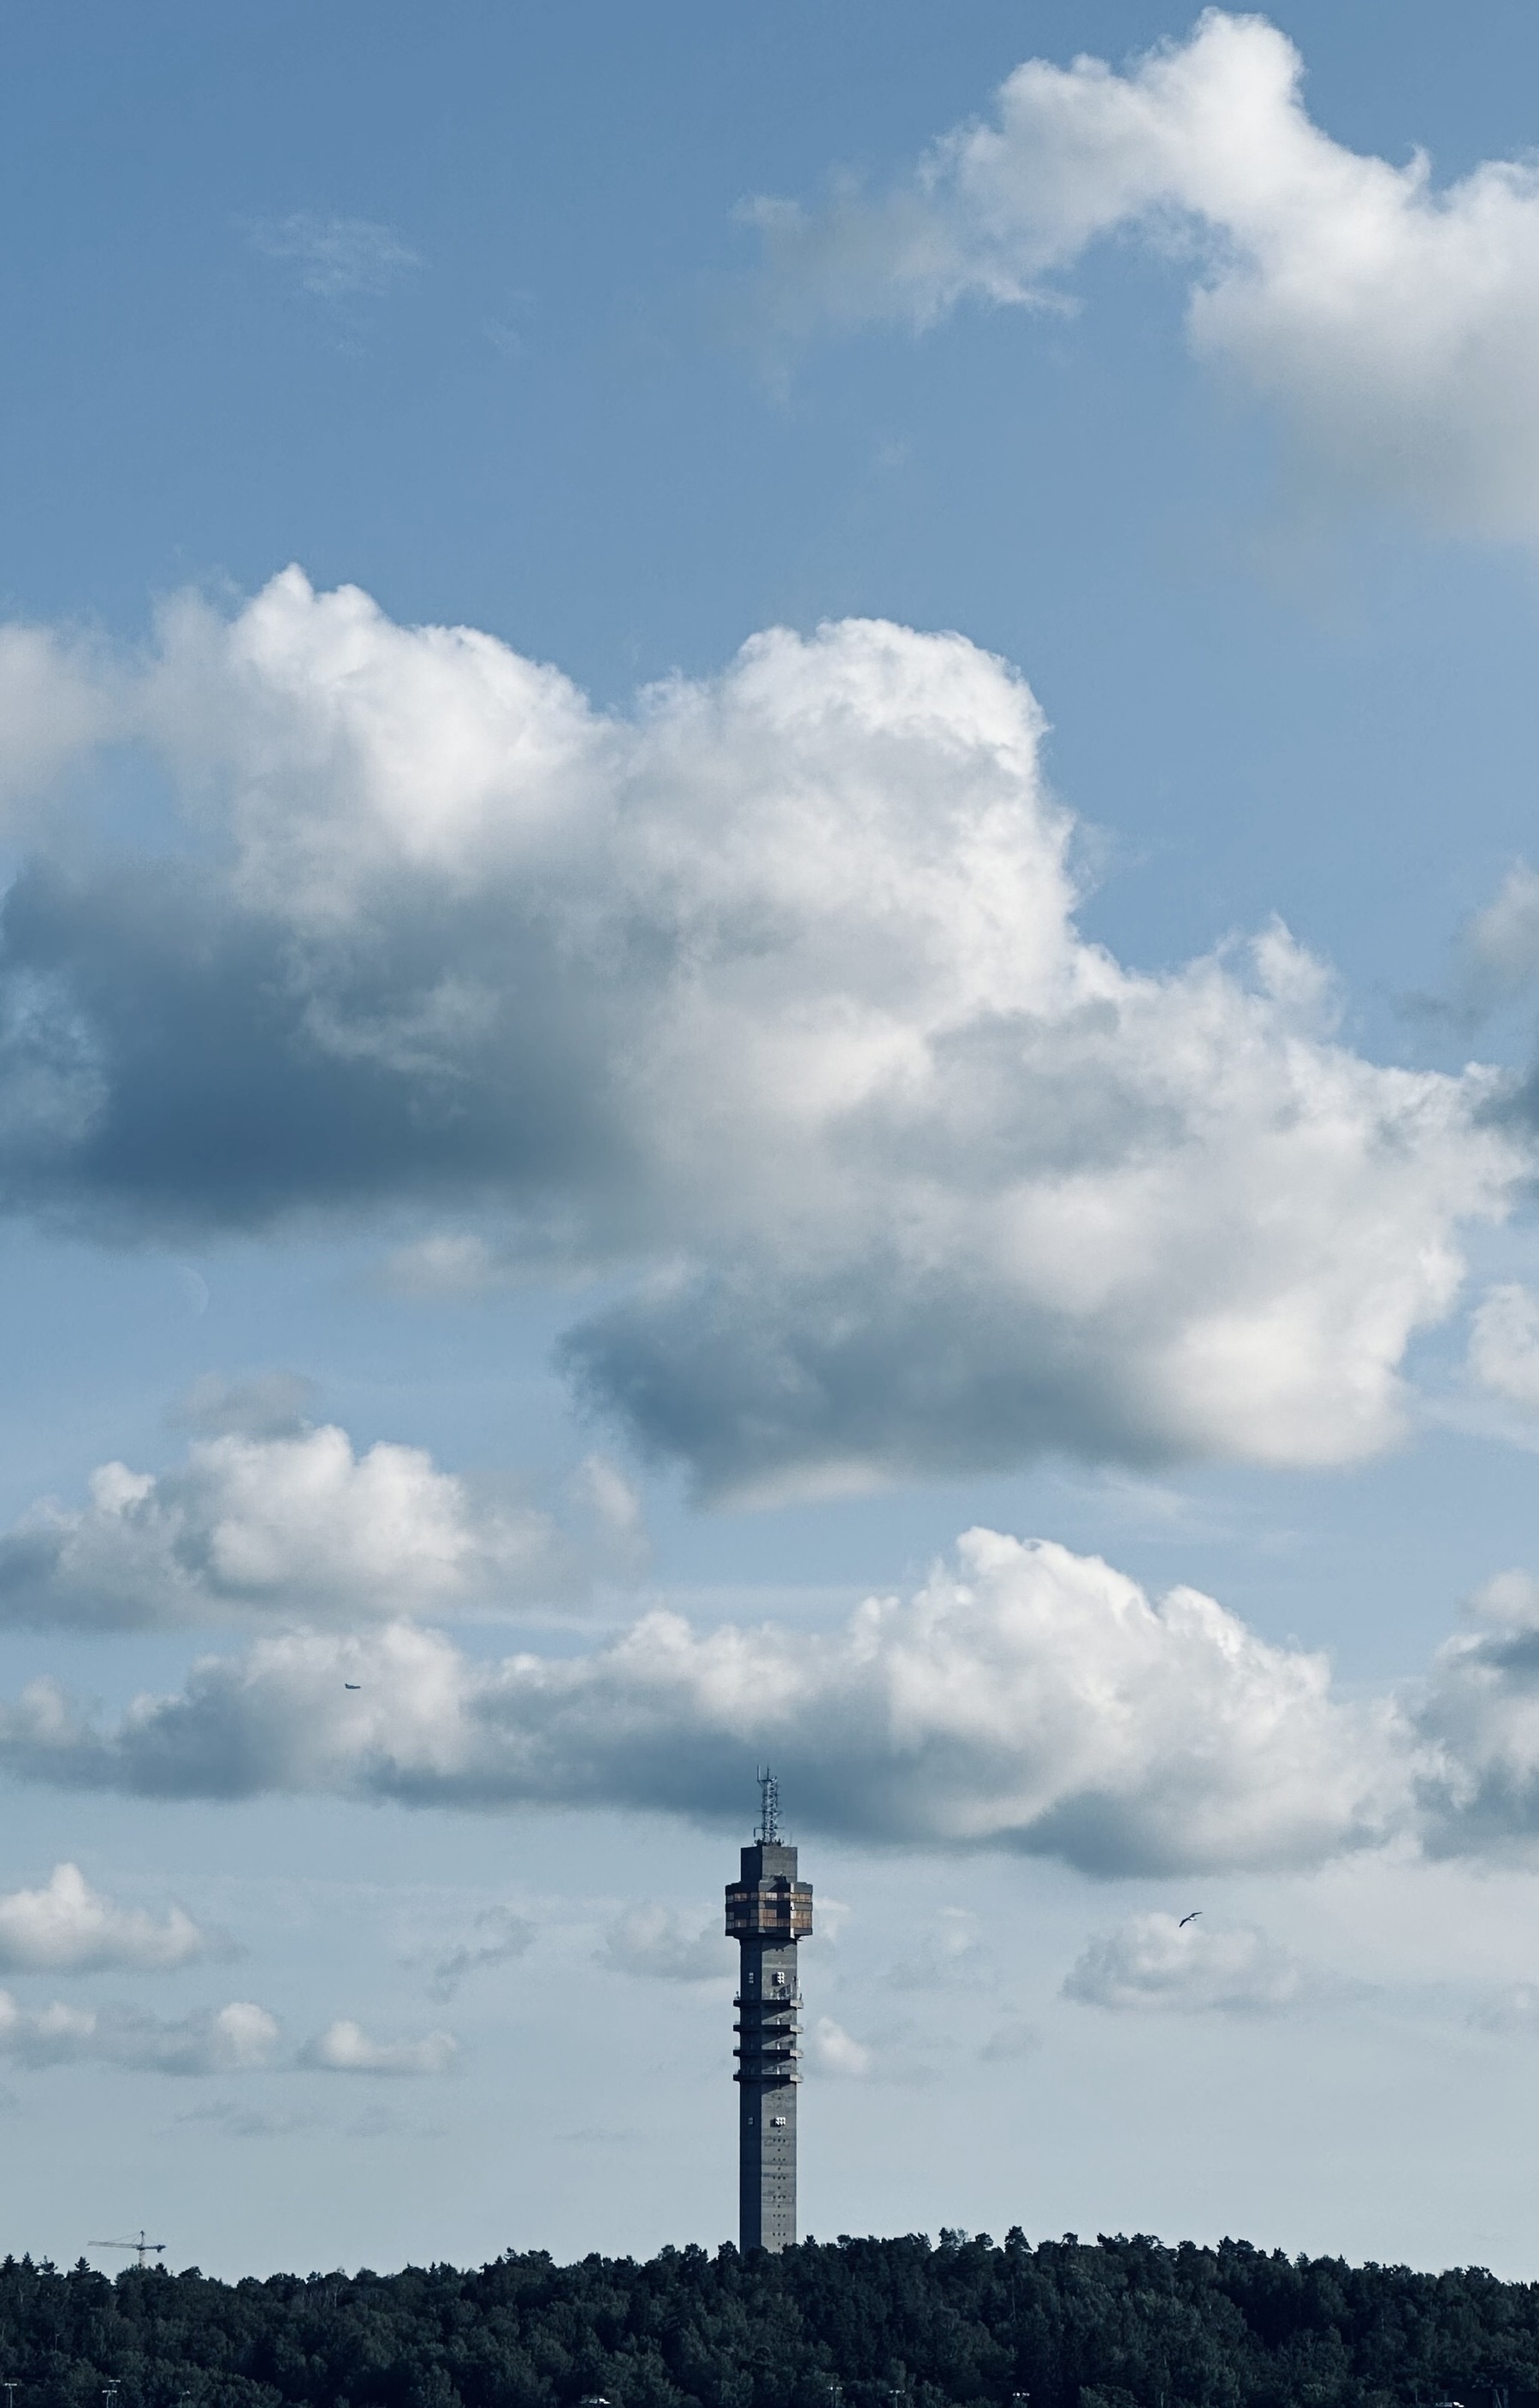 Kaknäs TV and radio tower in Stockholm, stood atop a hill under some clouds.